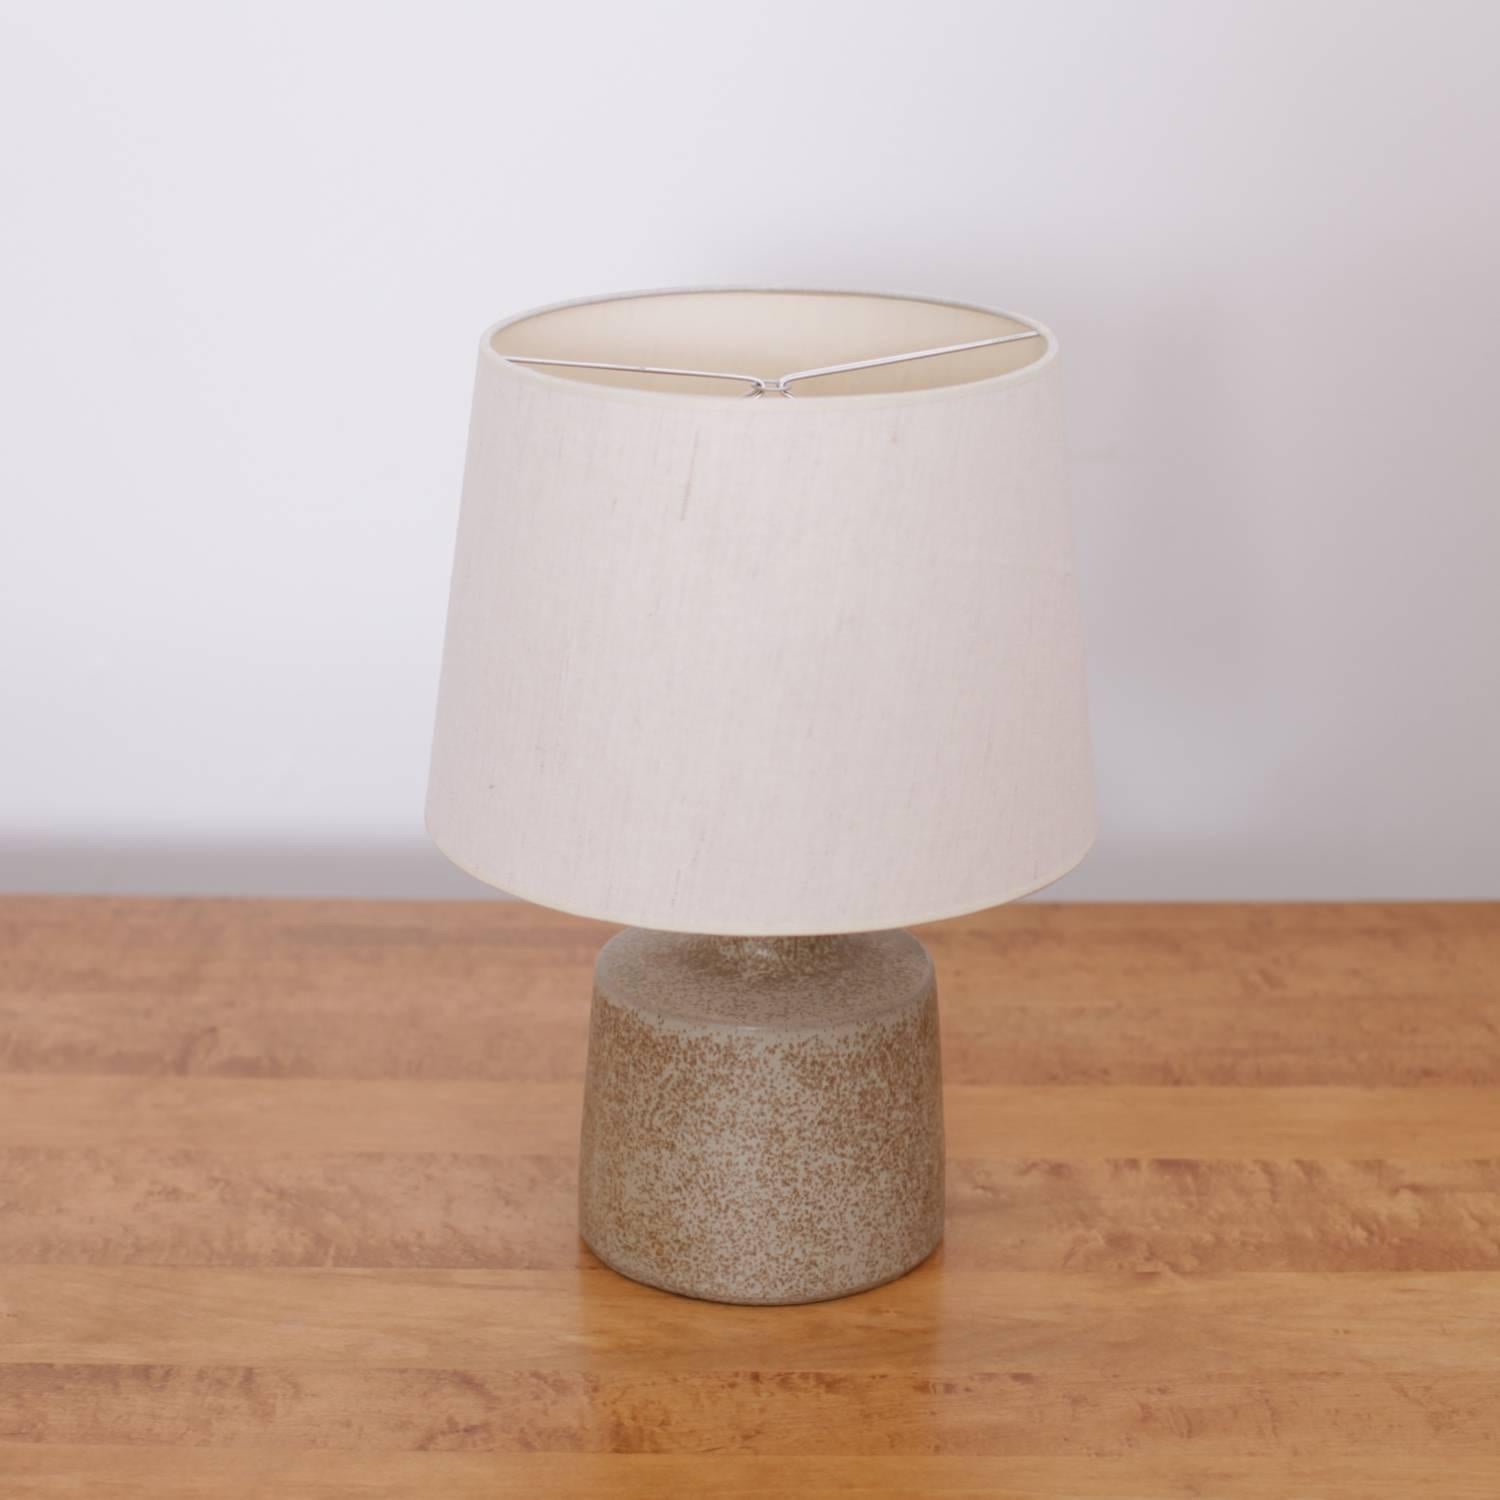 Wonderful stoneware table lamp n° 105 designed by Gordon Martz for Marshall Studios Inc. in excellent condition. No chips. New ivory colored linen shade. More lamps in the same style are available.

